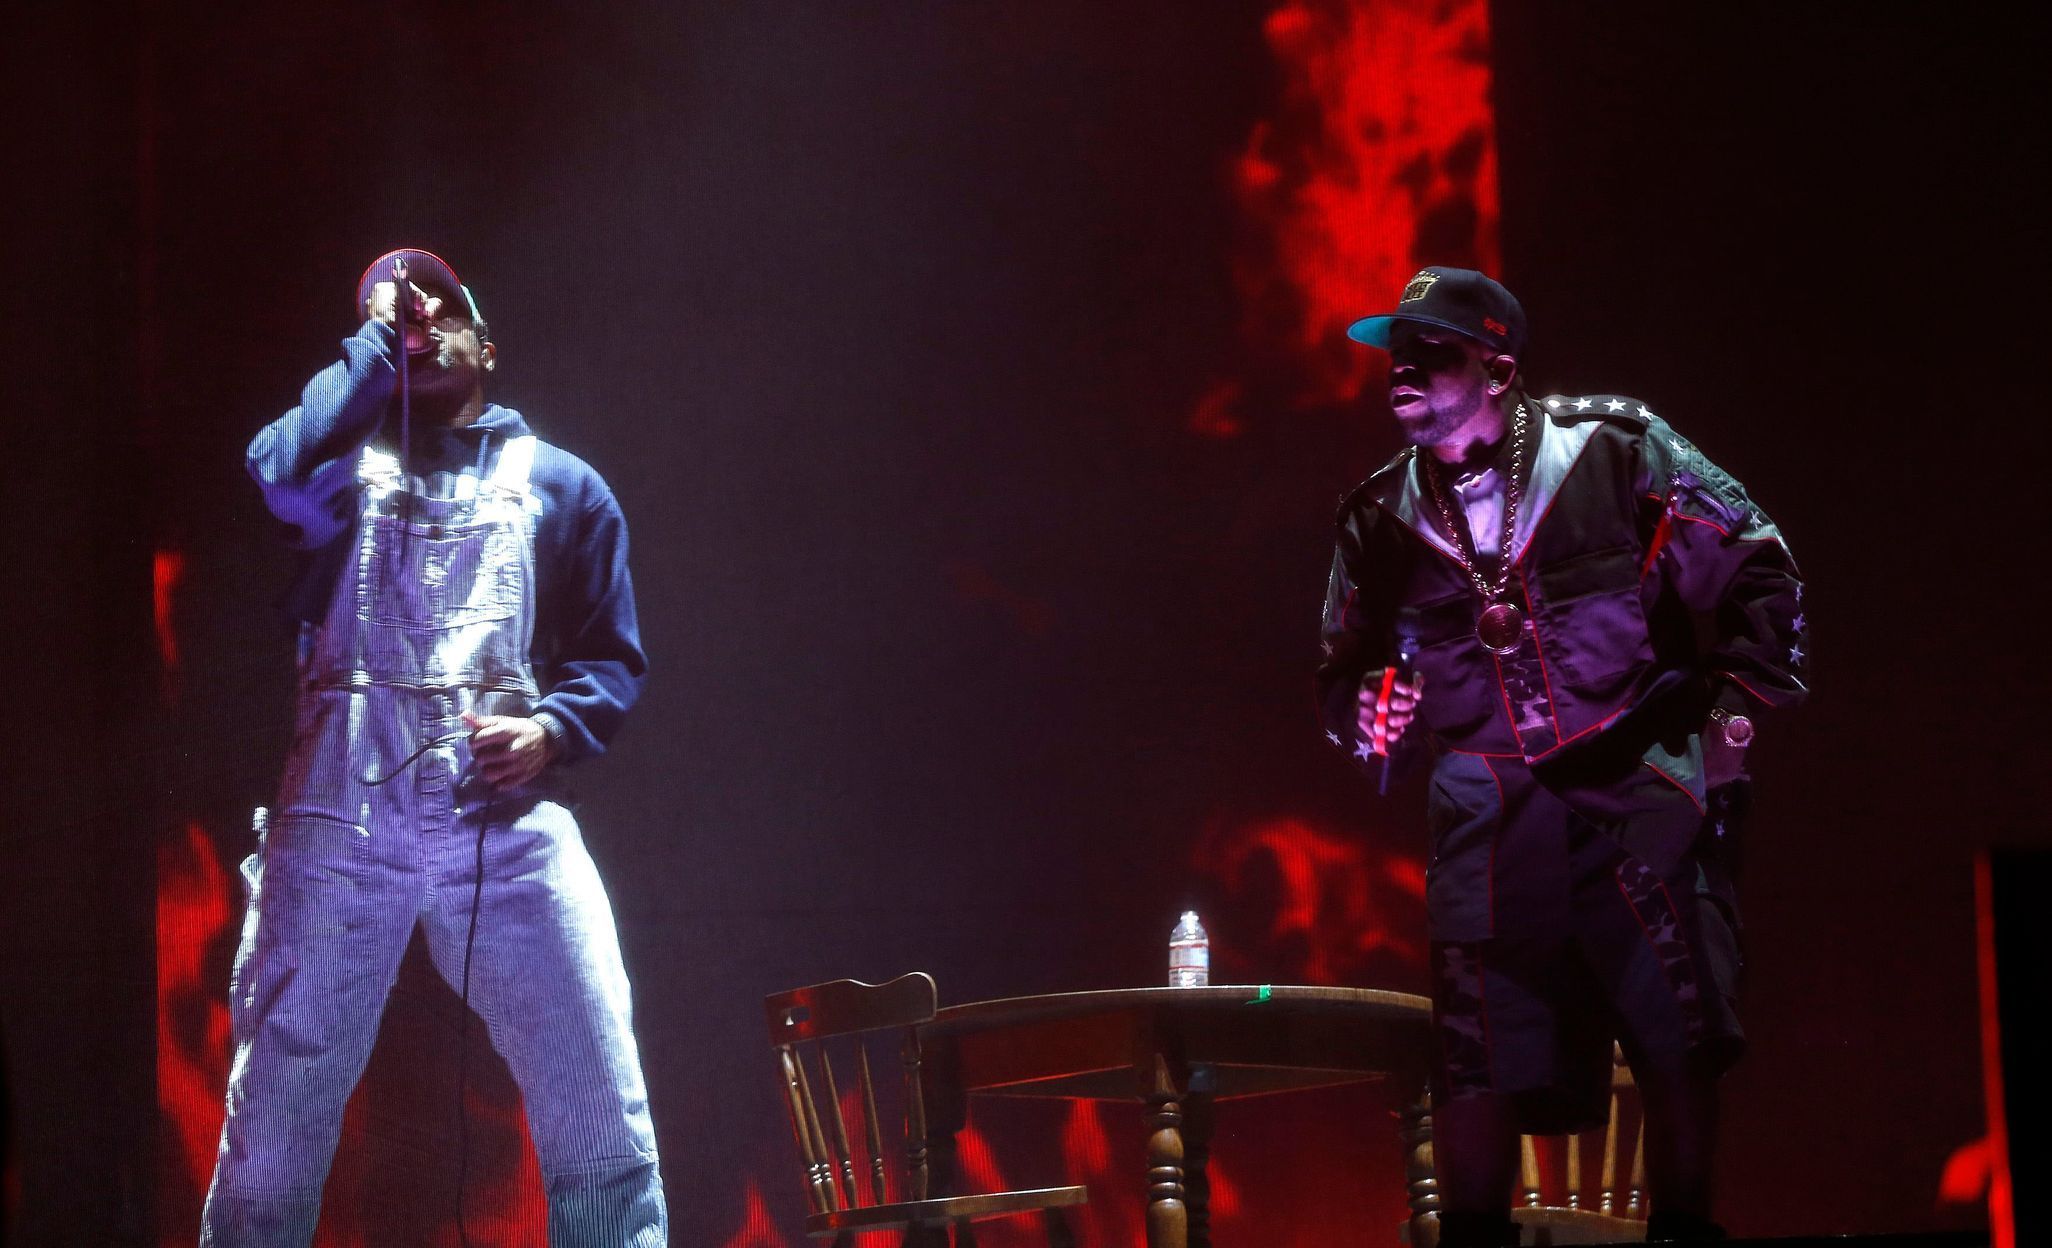 Big Boi and Andre 3000 of Outkast perform at the Coachella Valley Music and Arts Festival in Indio